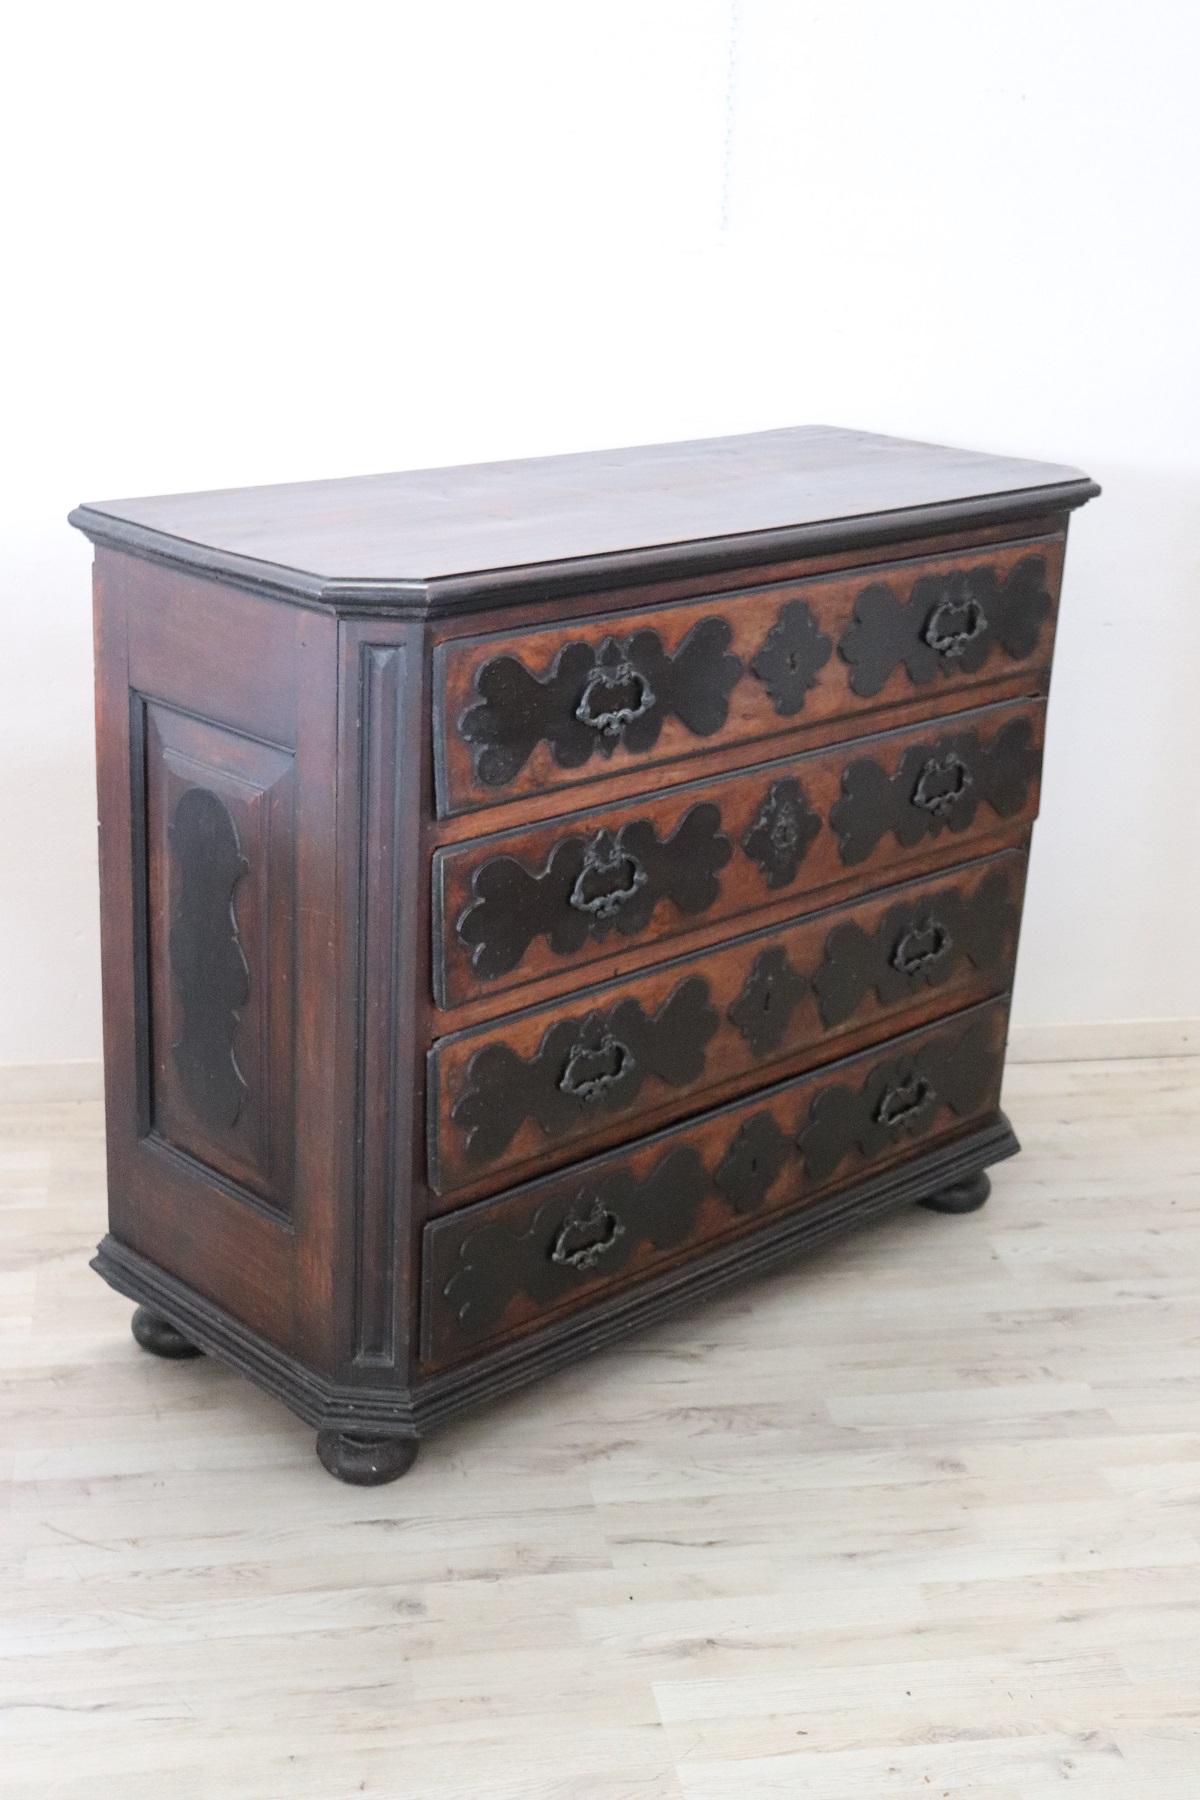 Important antique Italian Louis XIV chest of drawers 1680s walnut wood. The top and sides are in solid cherrywood. On the front four large and useful drawers. In the 17th century only important families could afford to have furniture of this value.